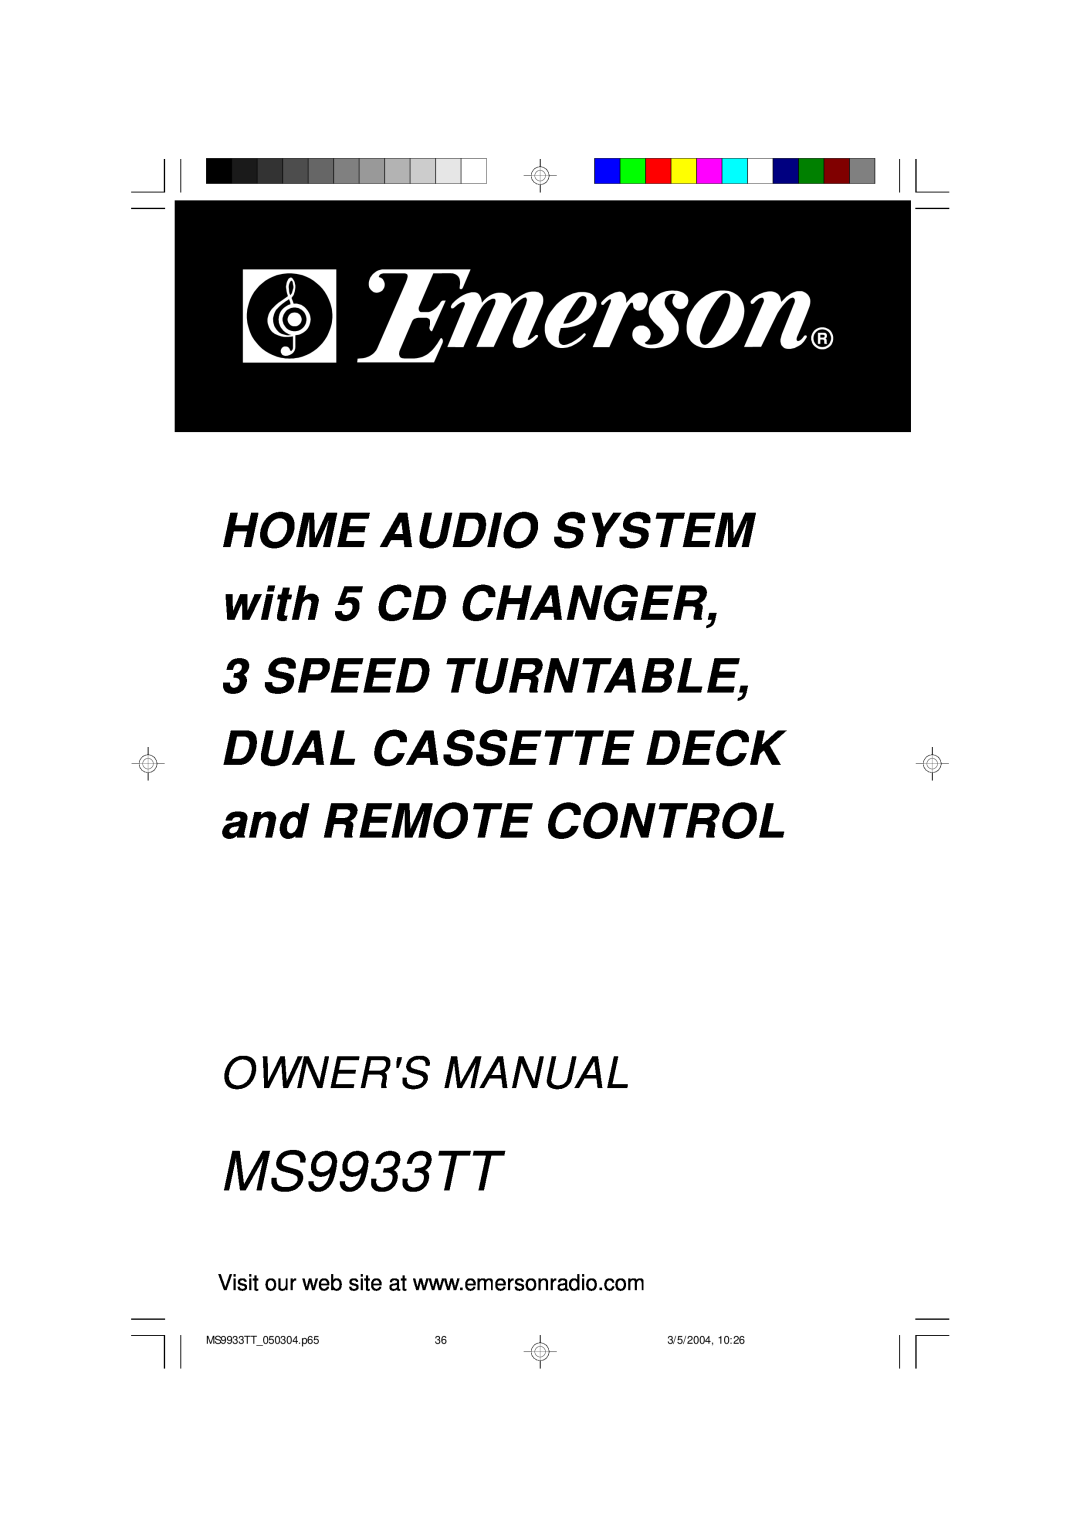 Emerson owner manual HOME AUDIO SYSTEM with 5 CD CHANGER, MS9933TT 050304.p65, 3/5/2004 